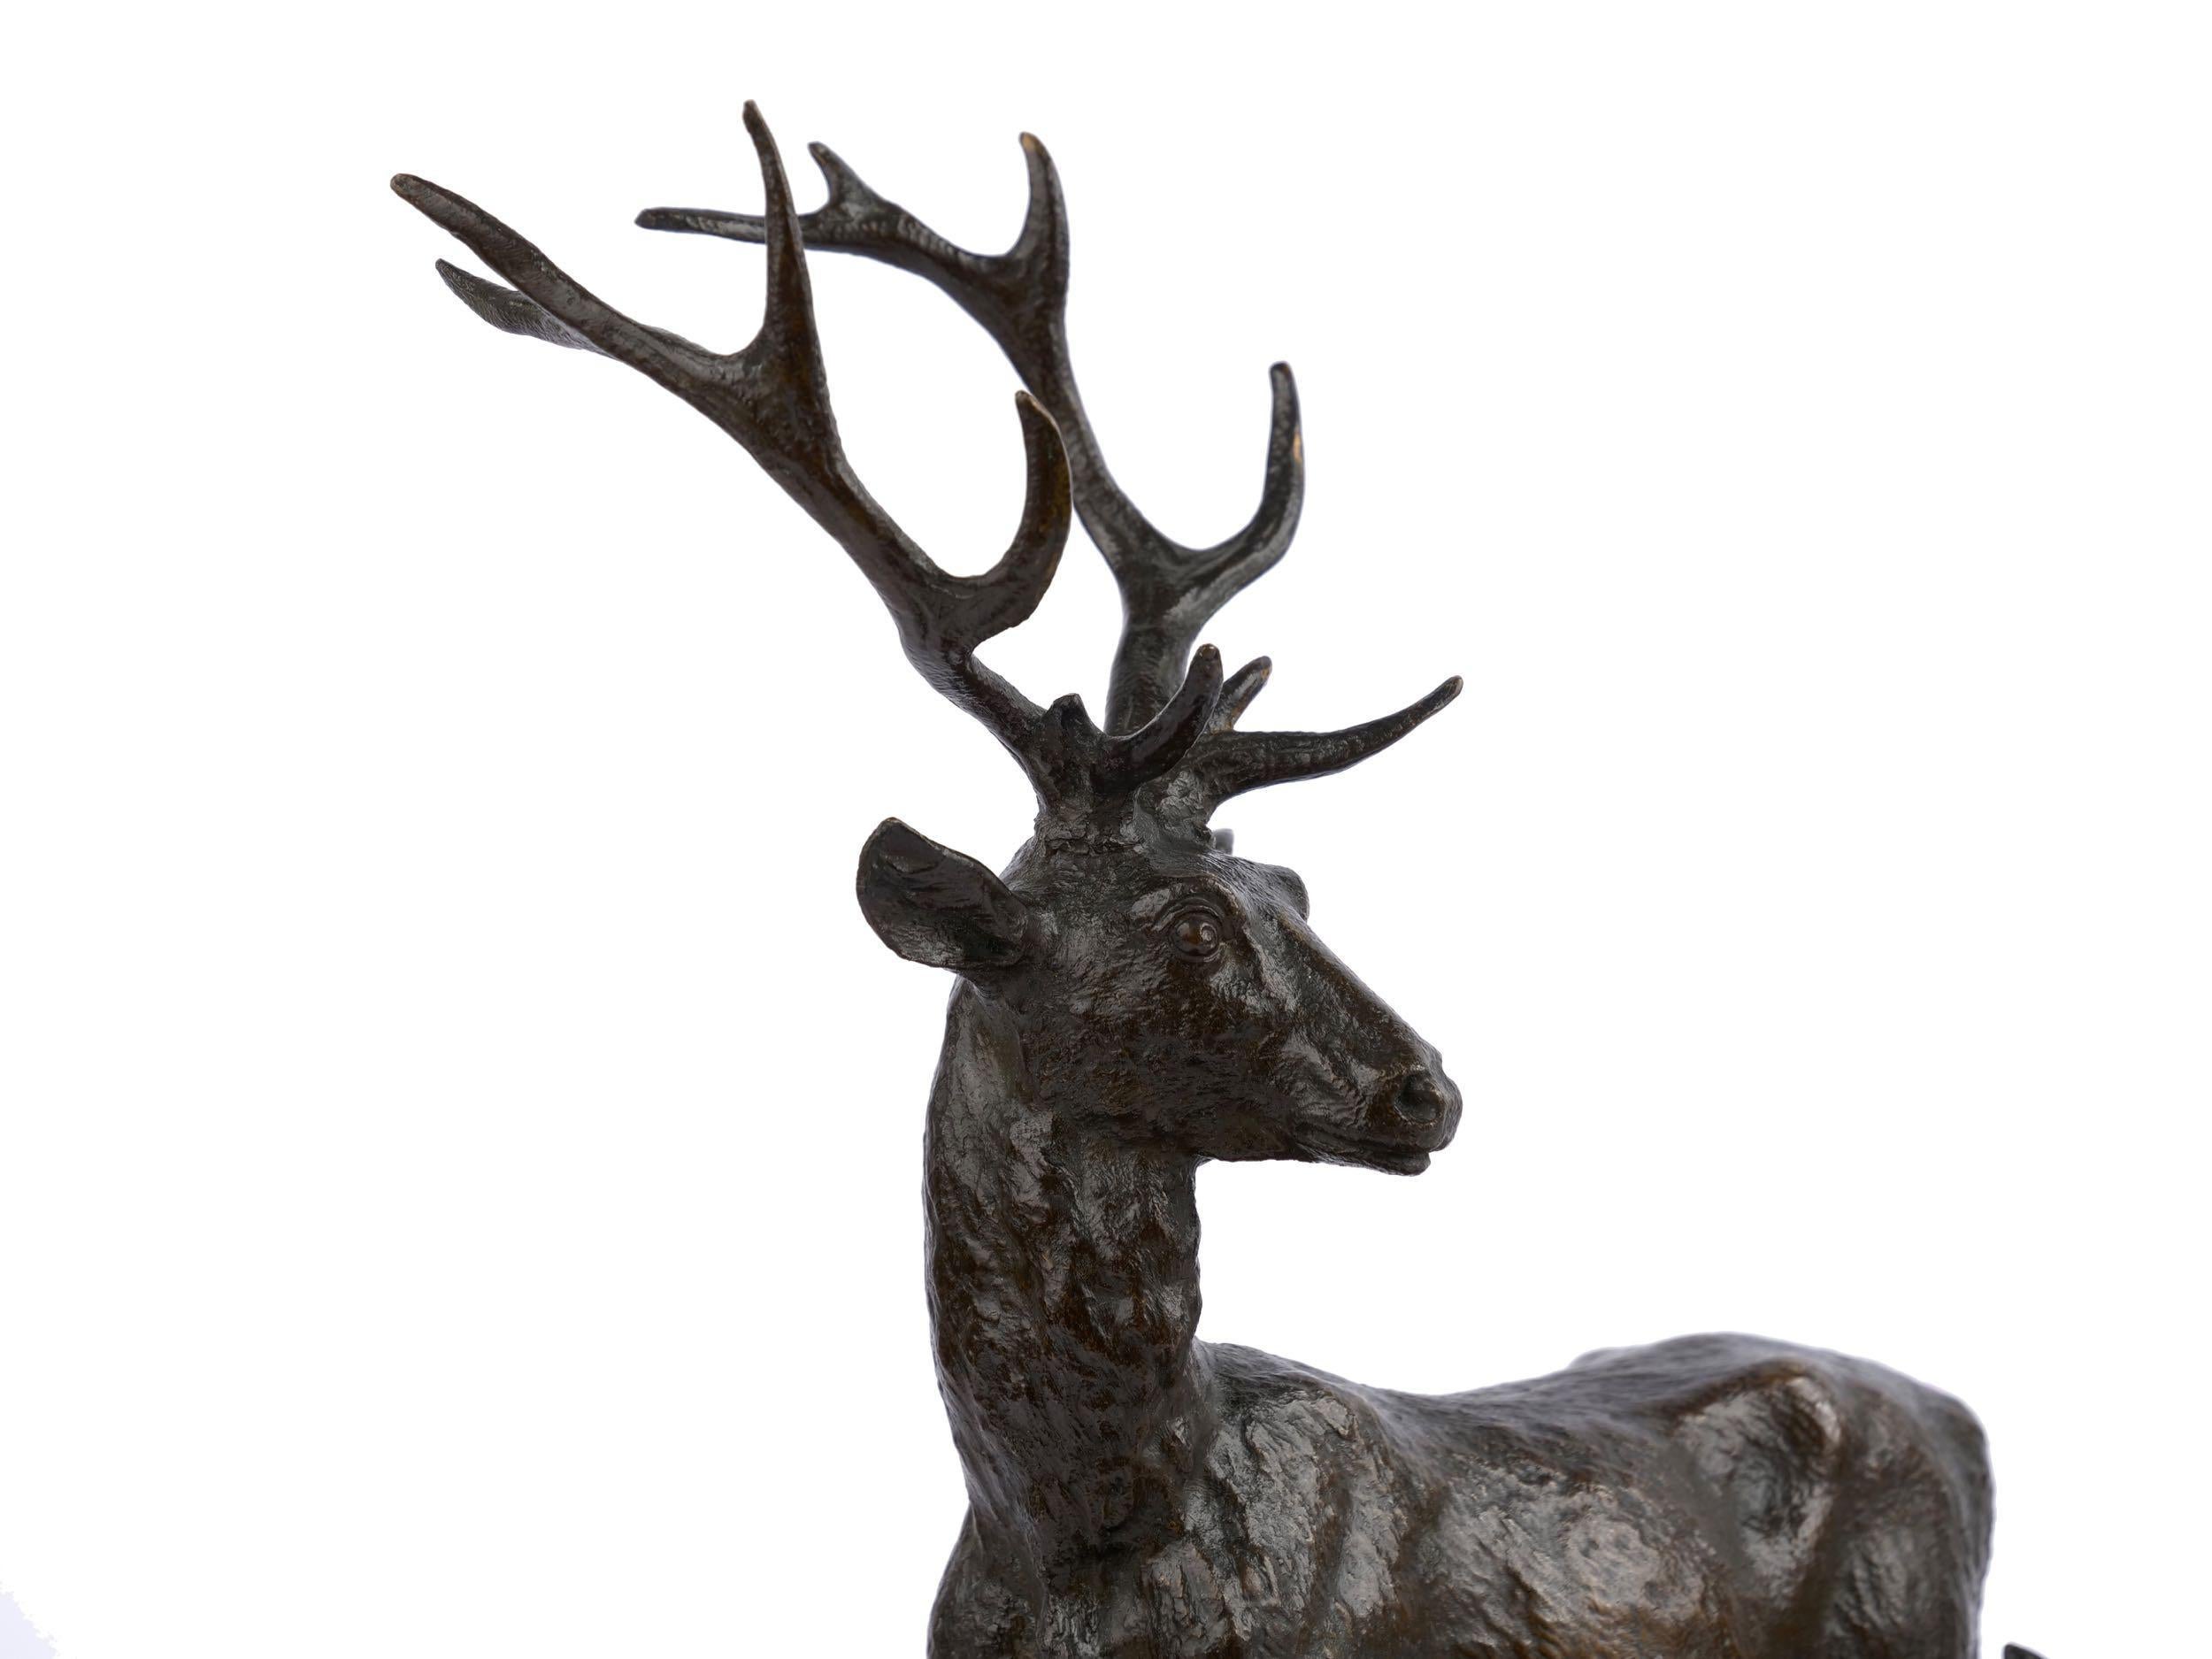 Bronze Sculpture Group “Family of Deer” by Christophe Fratin & Debraux Foundry 5